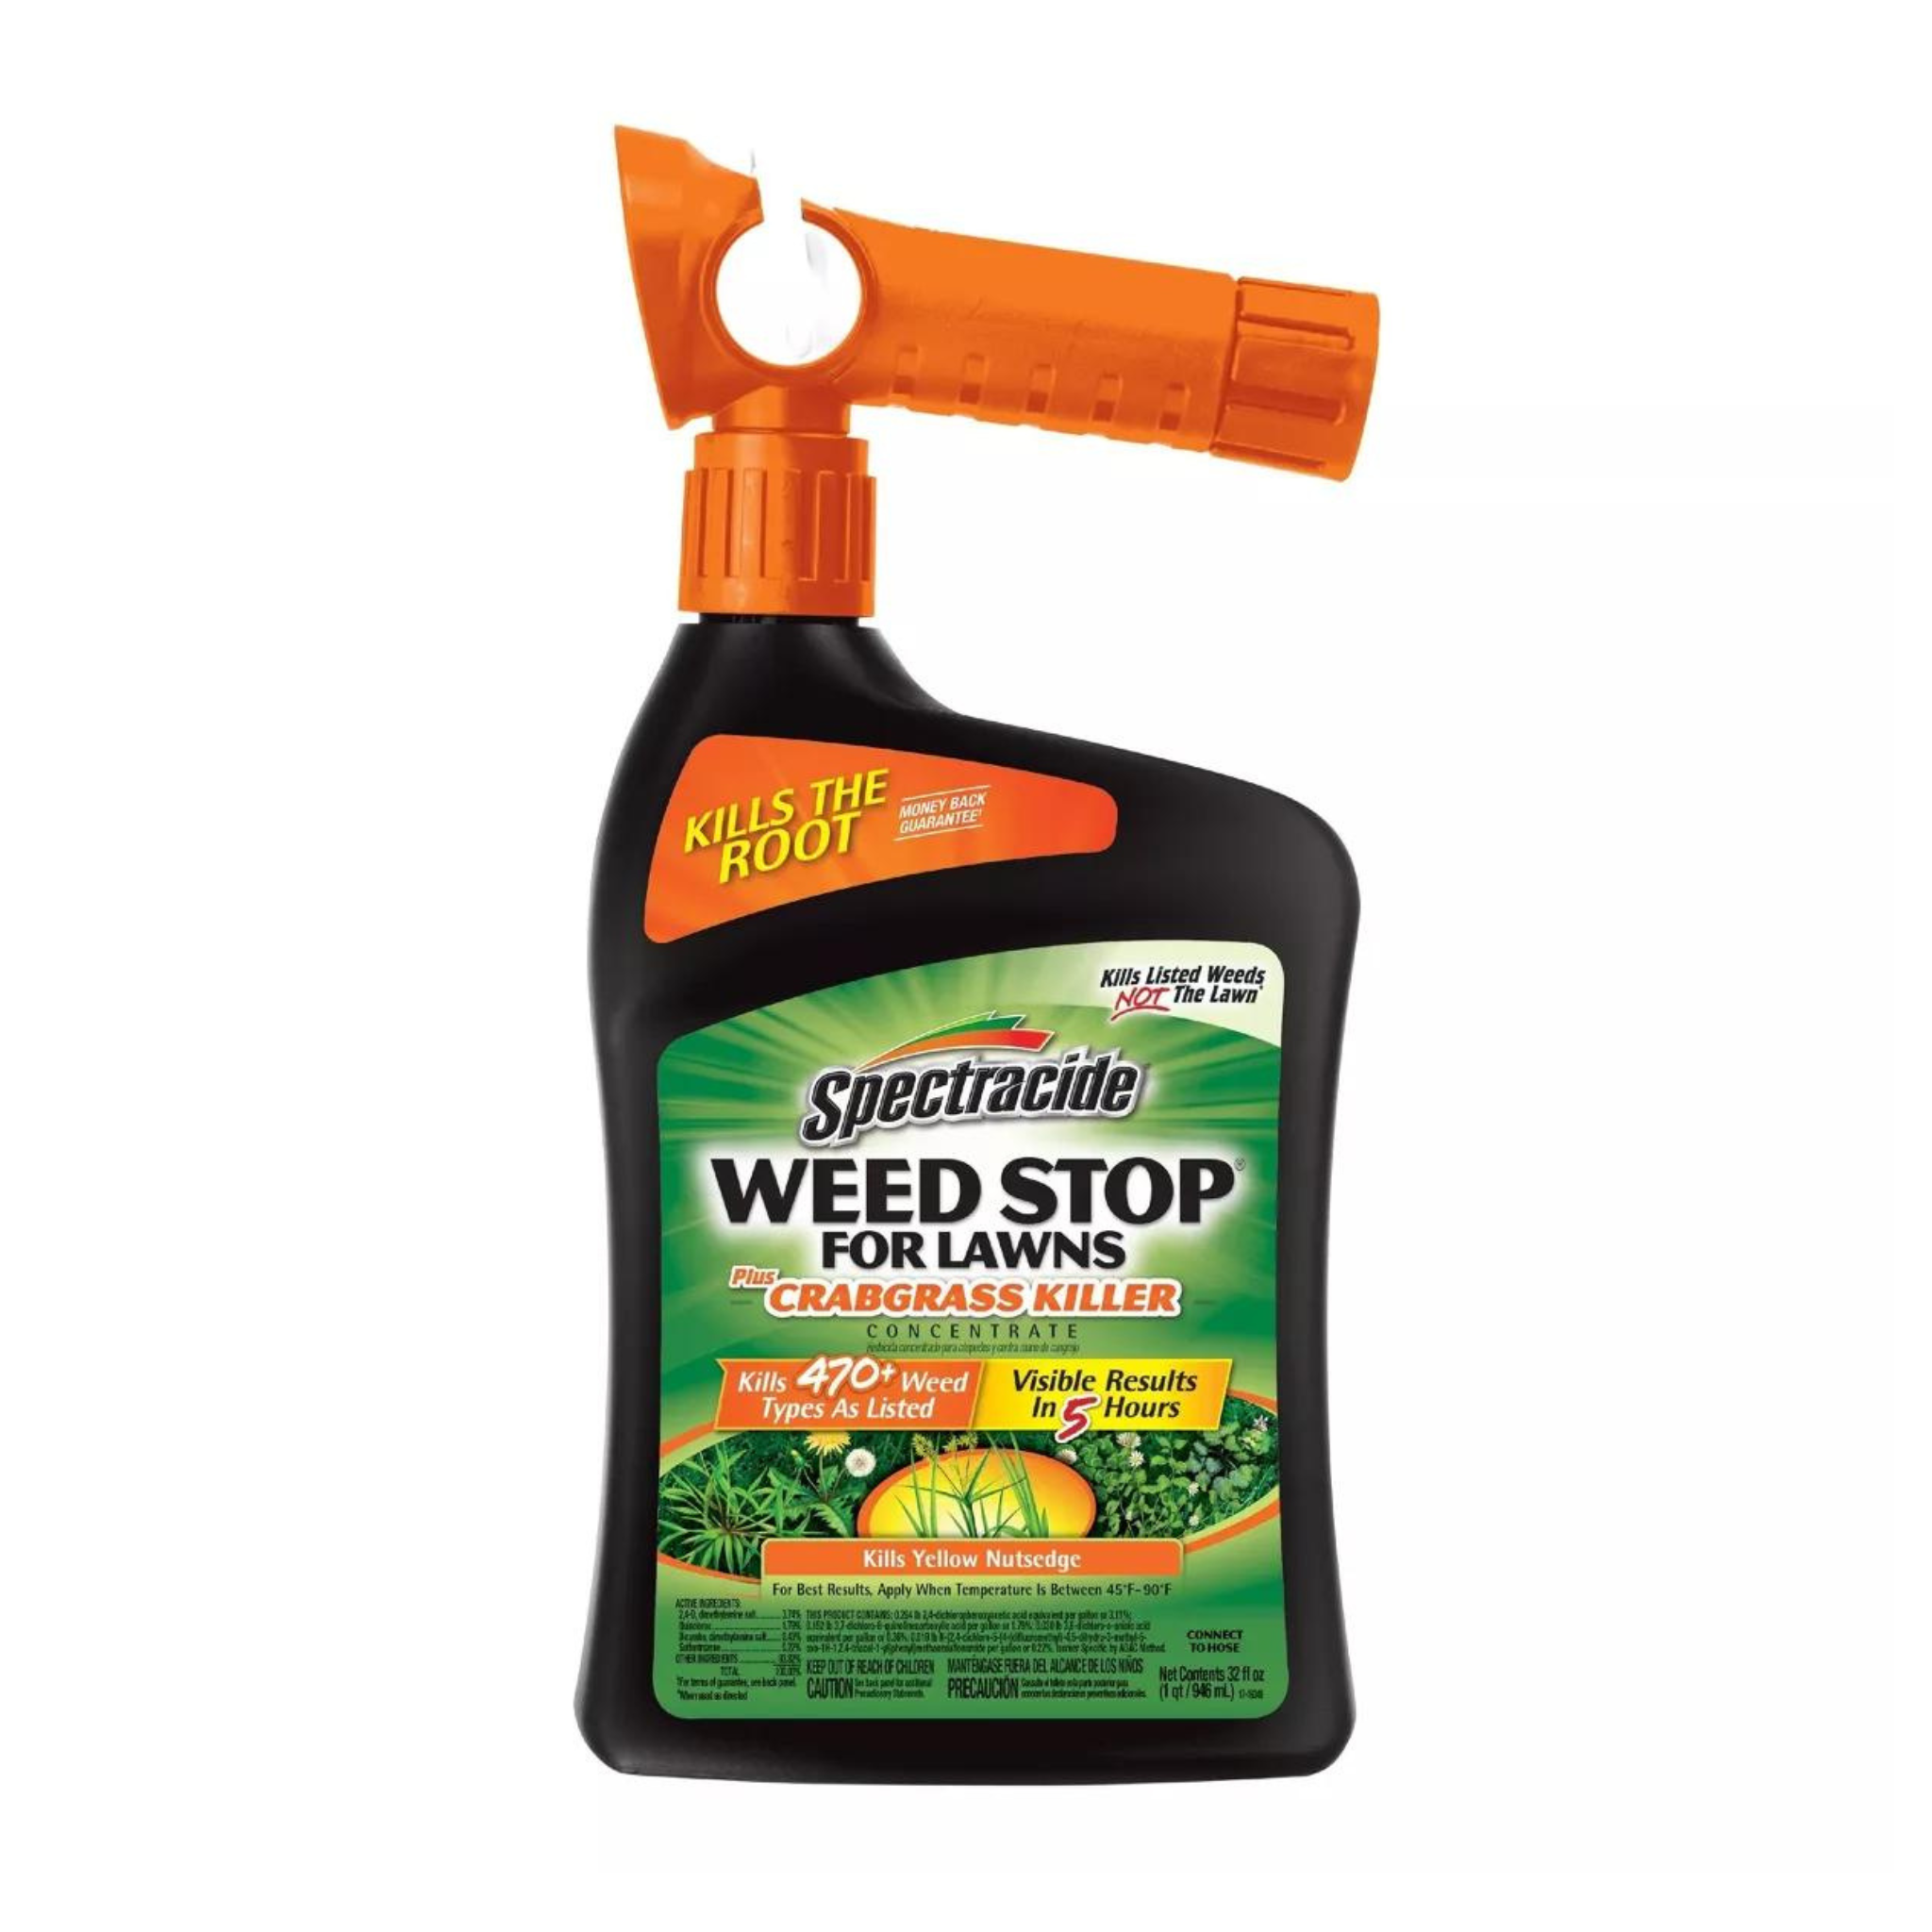 32-oz Spectracide Weed Stop Ready-to-Spray Crabgrass Weed Killer